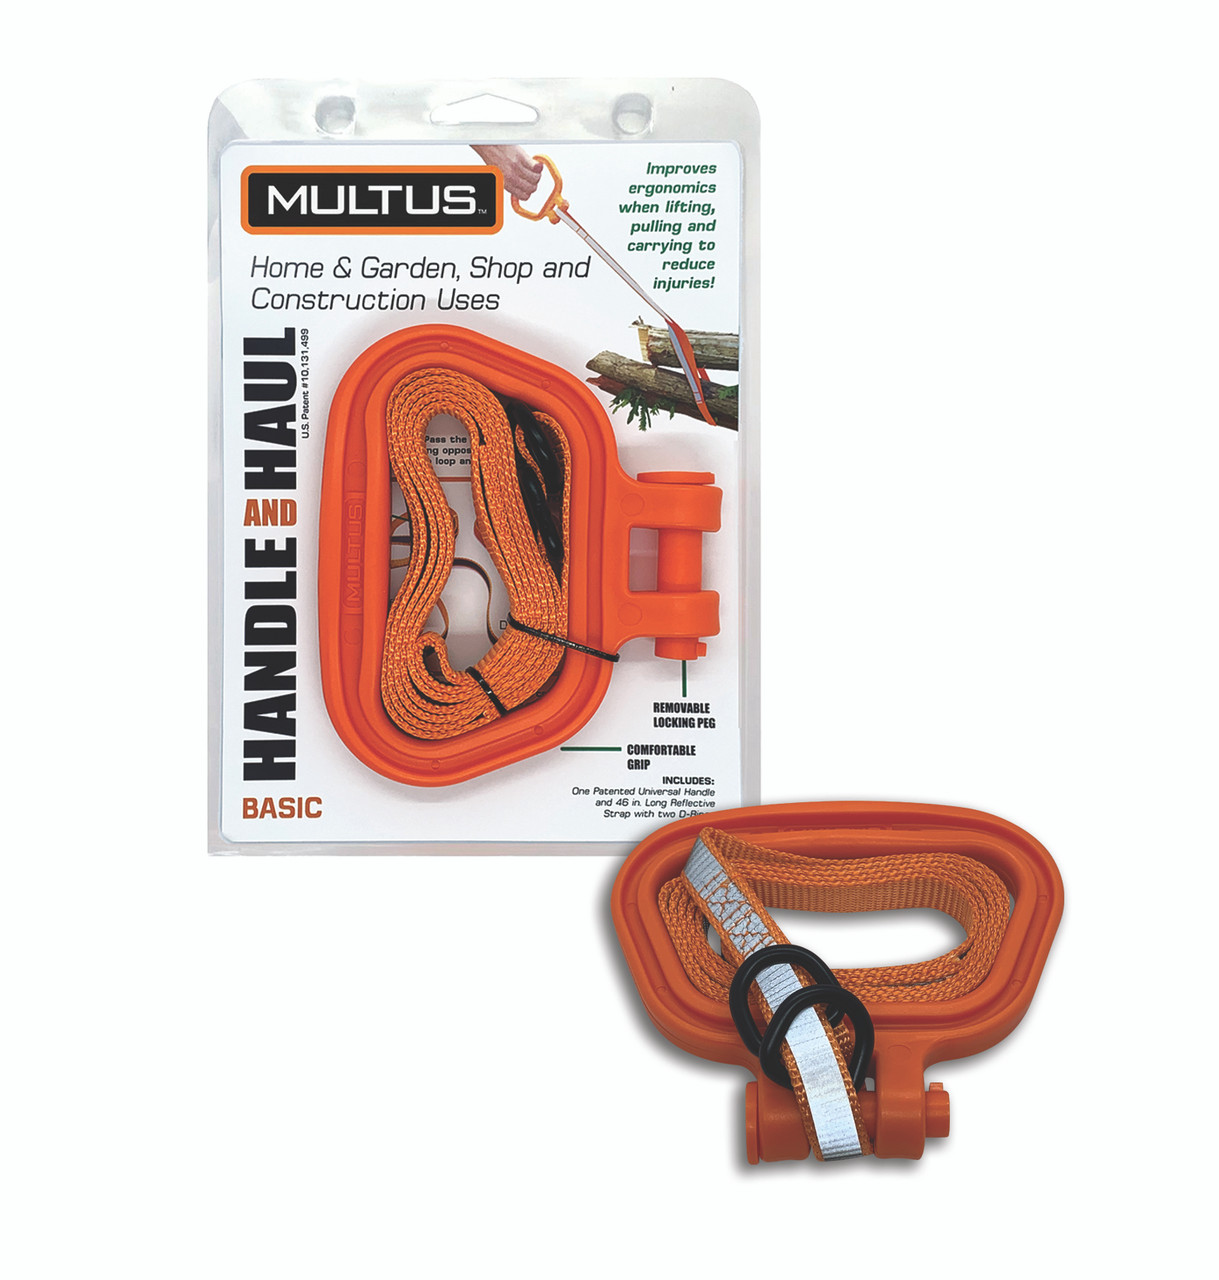 Handle and Haul Basic Home and Garden Shop Construction Cord Organizer Handle and Strap to Secure and Carry or Drag Objects Fast and Easy 